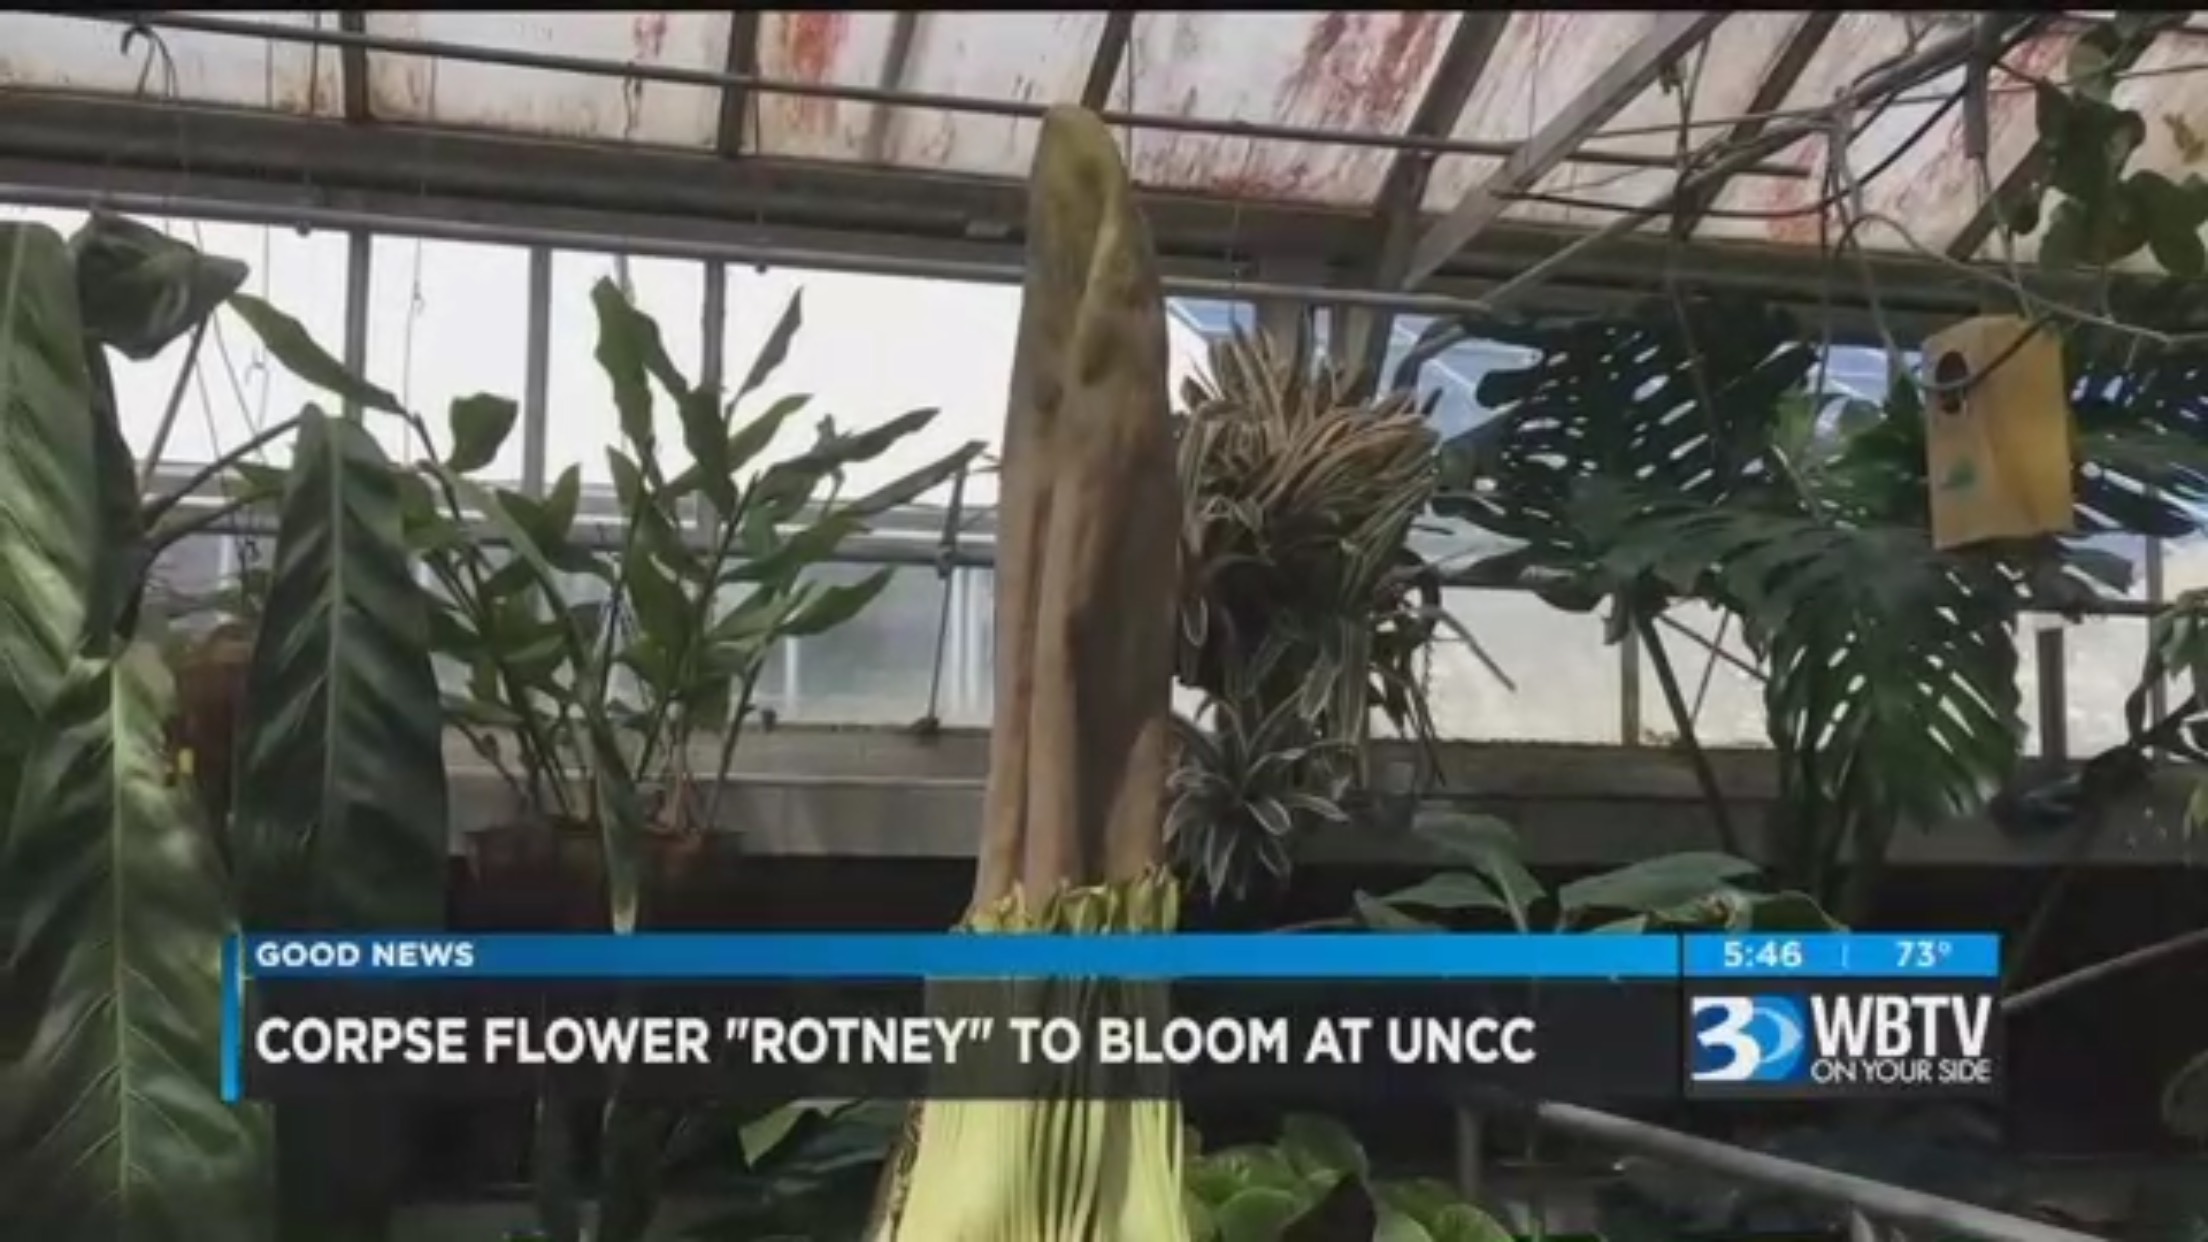 Corpse Flower "Rotney" To Bloom